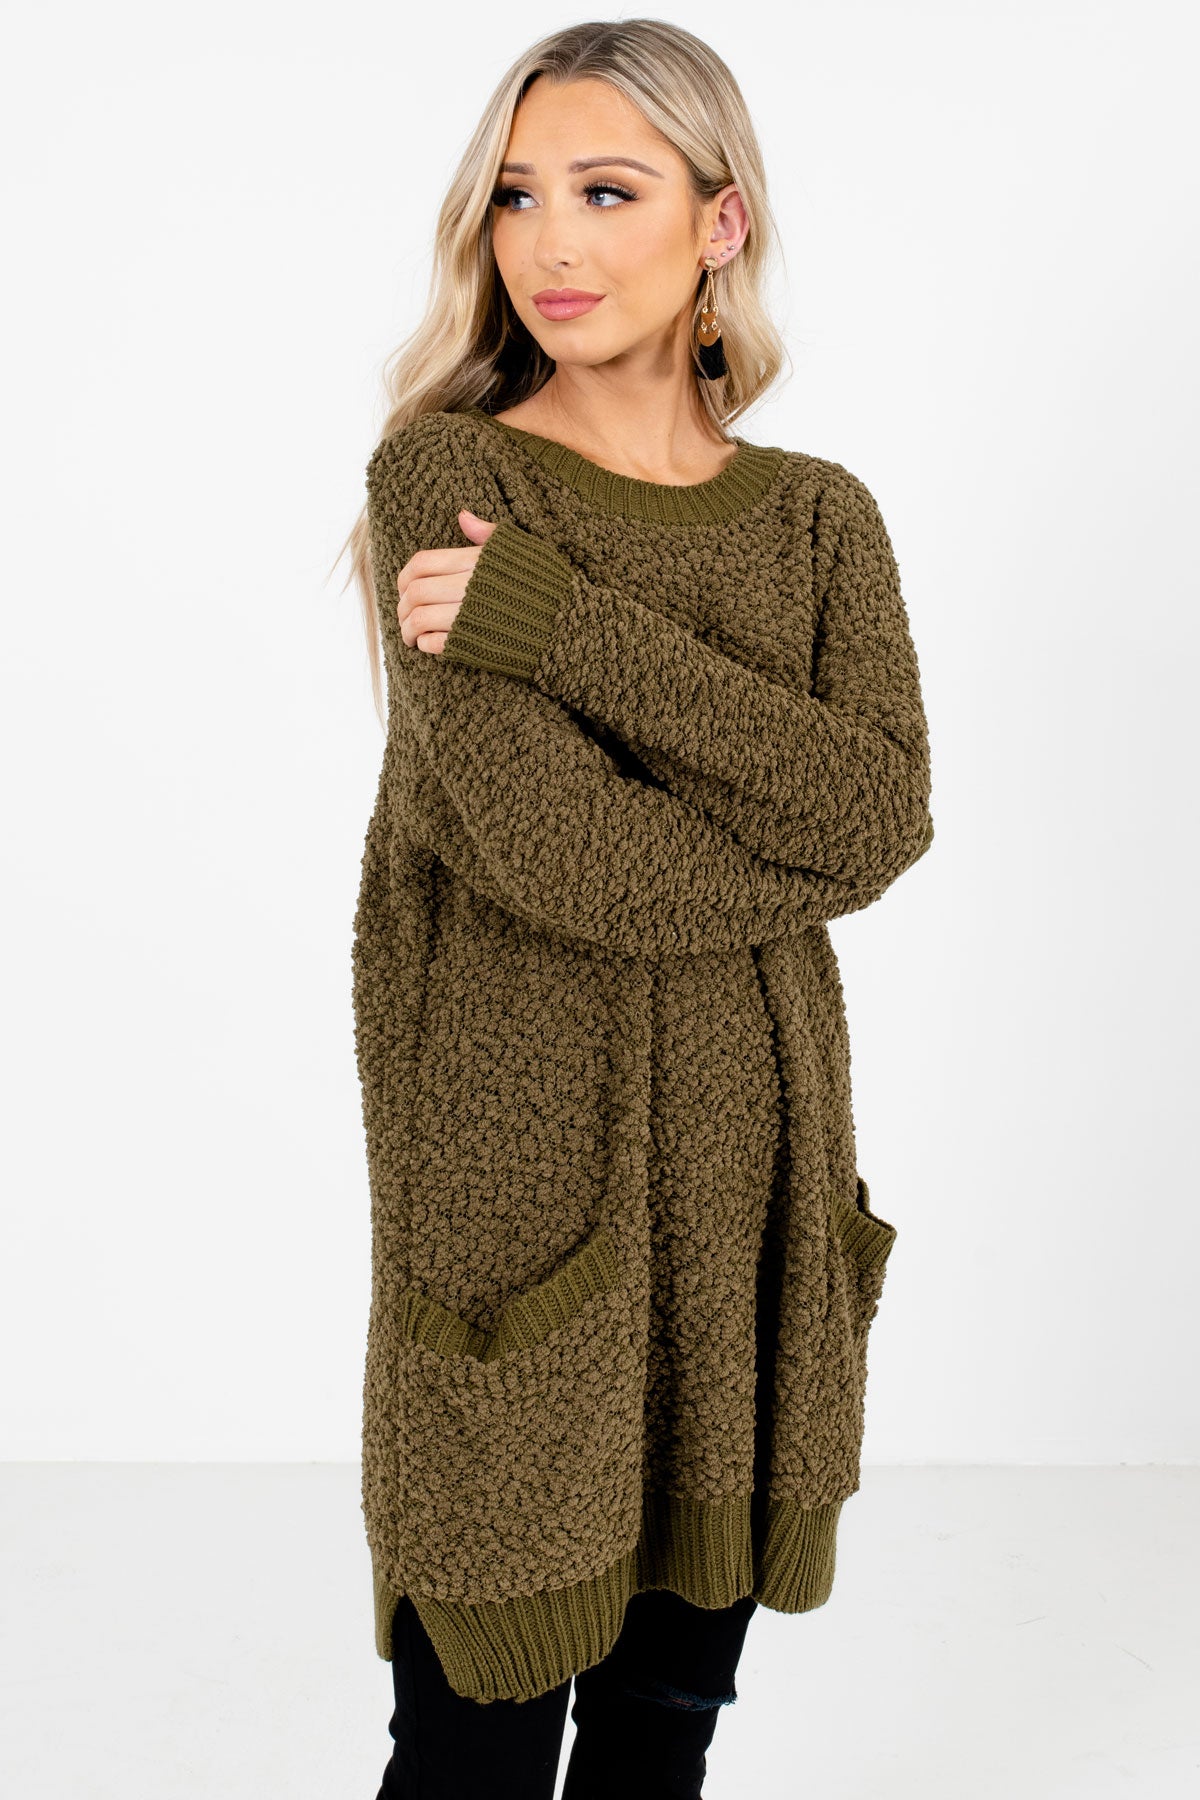 Olive Green Cute and Comfortable Boutique Clothing for Women